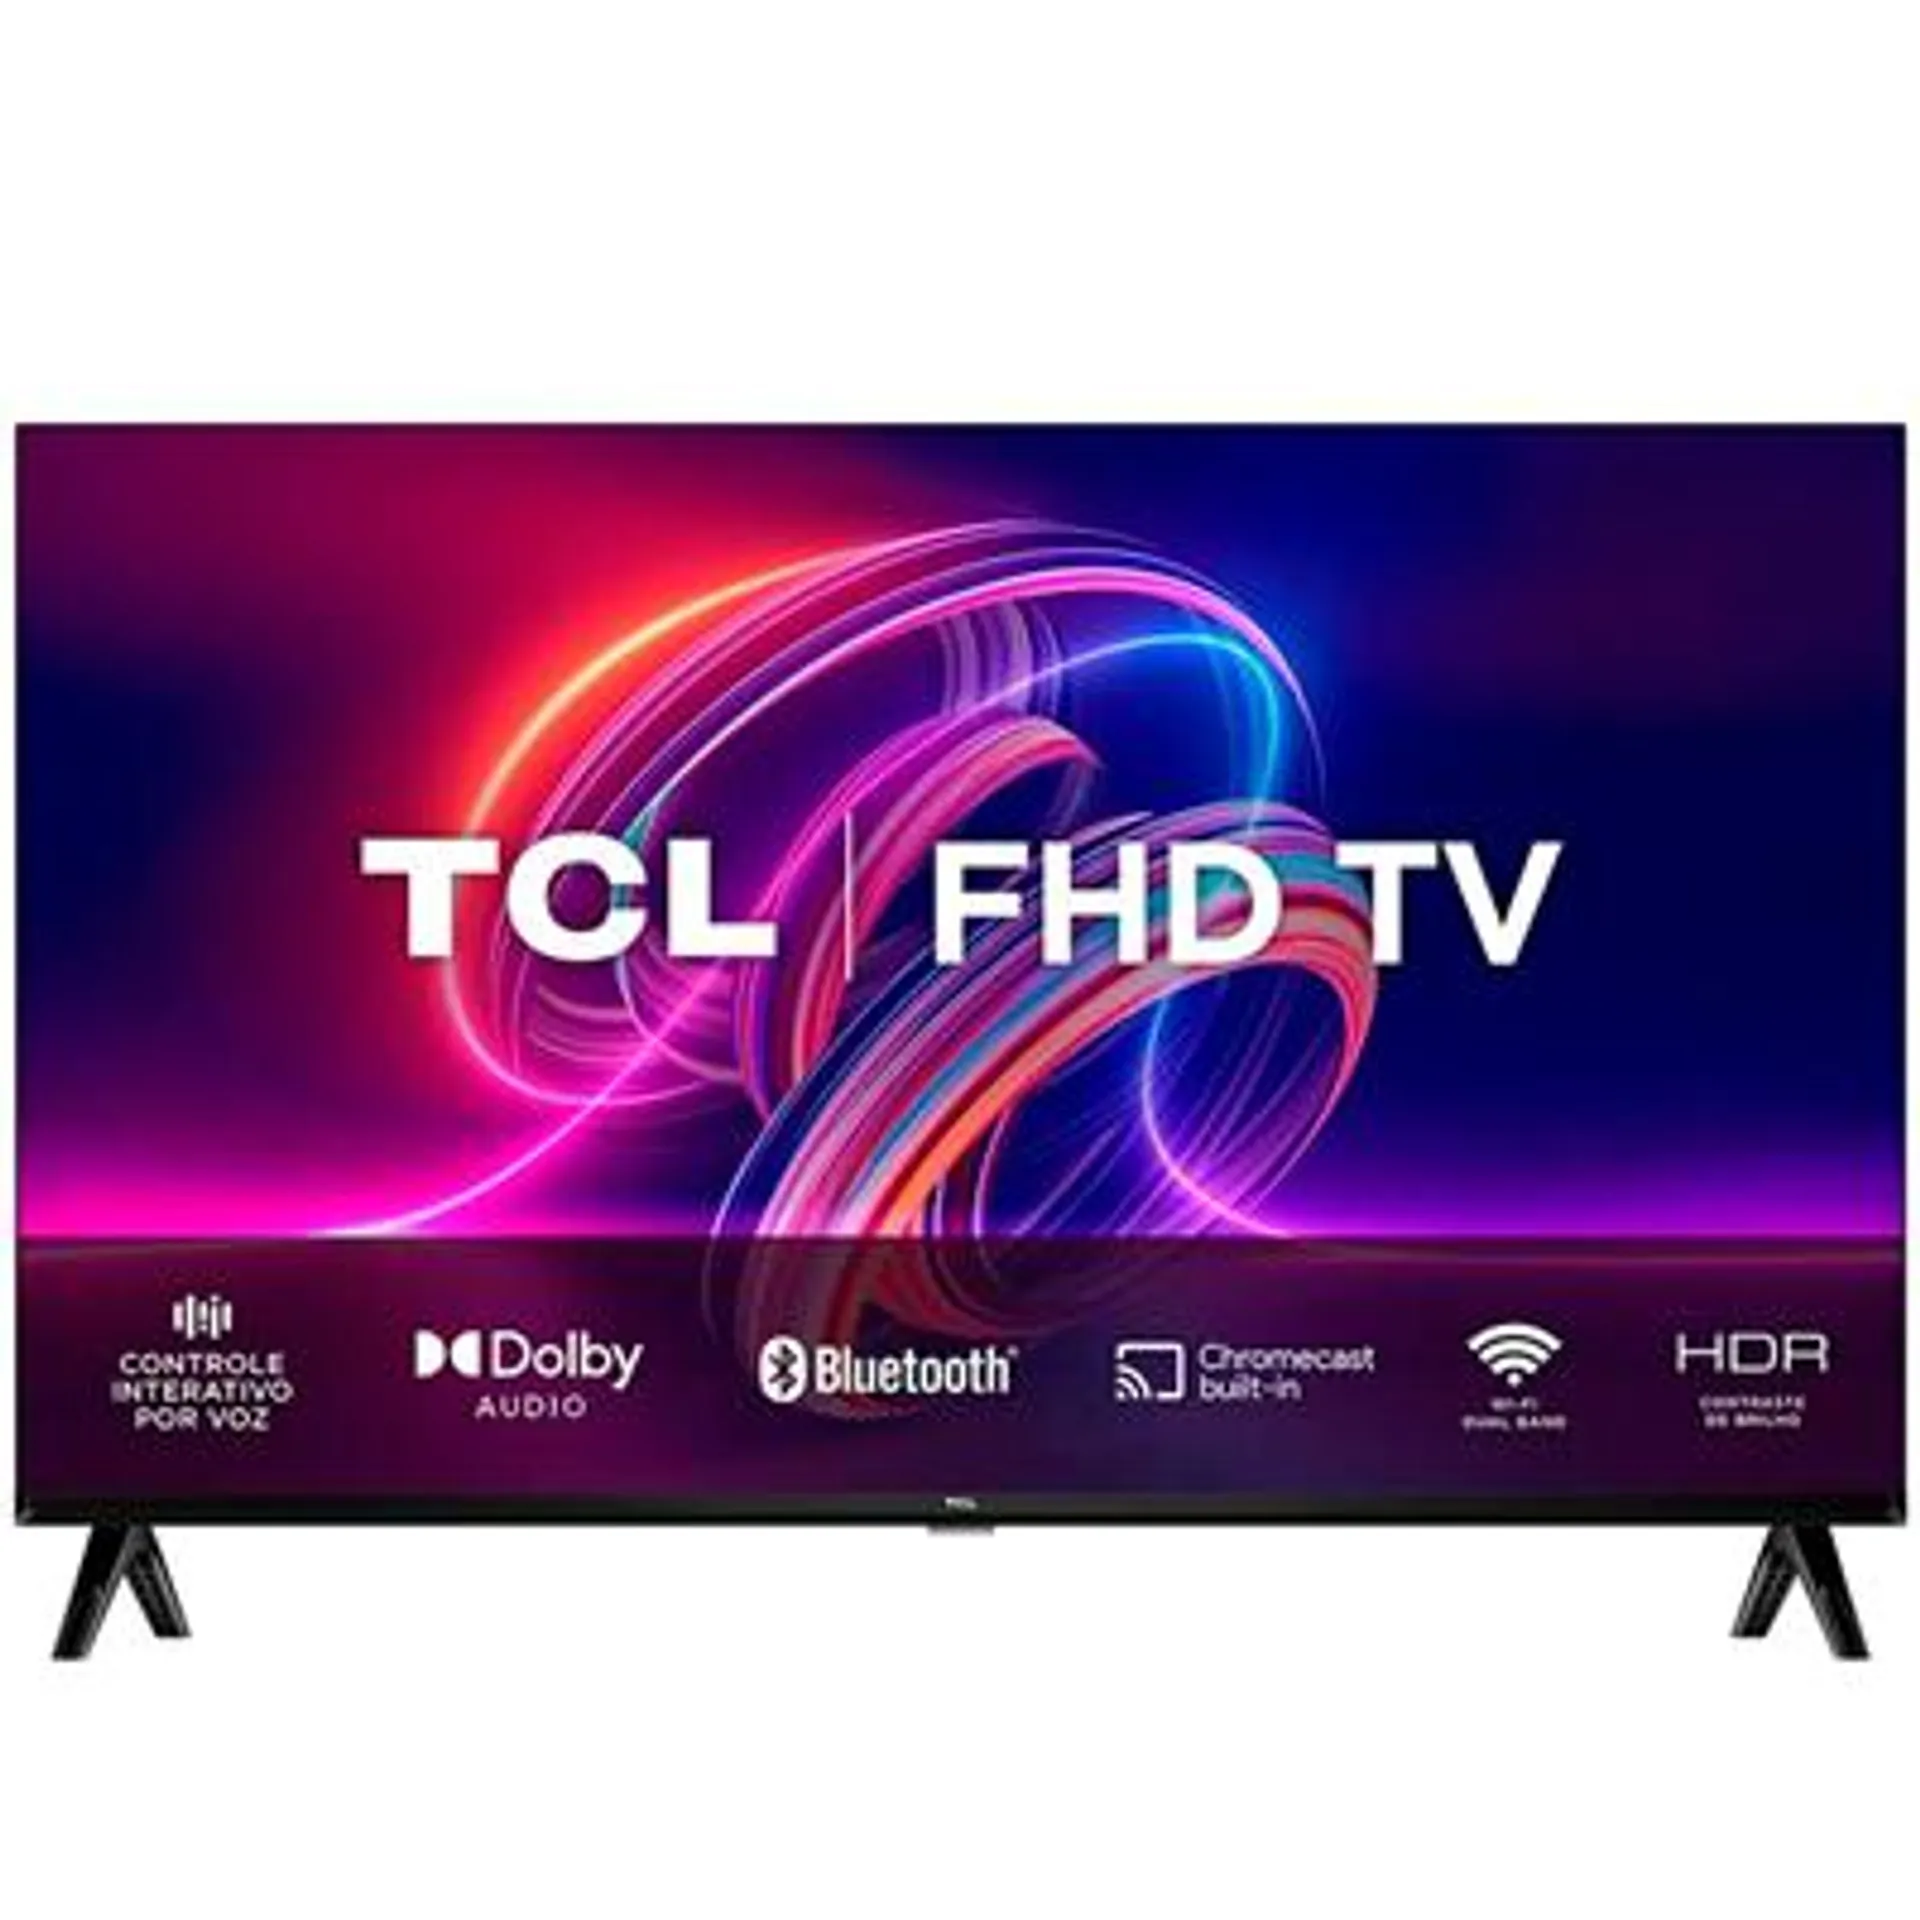 Smart TV TCL 40" LED FHD Android Bluetooth HDMI HDR10 Wifi 40S5400A